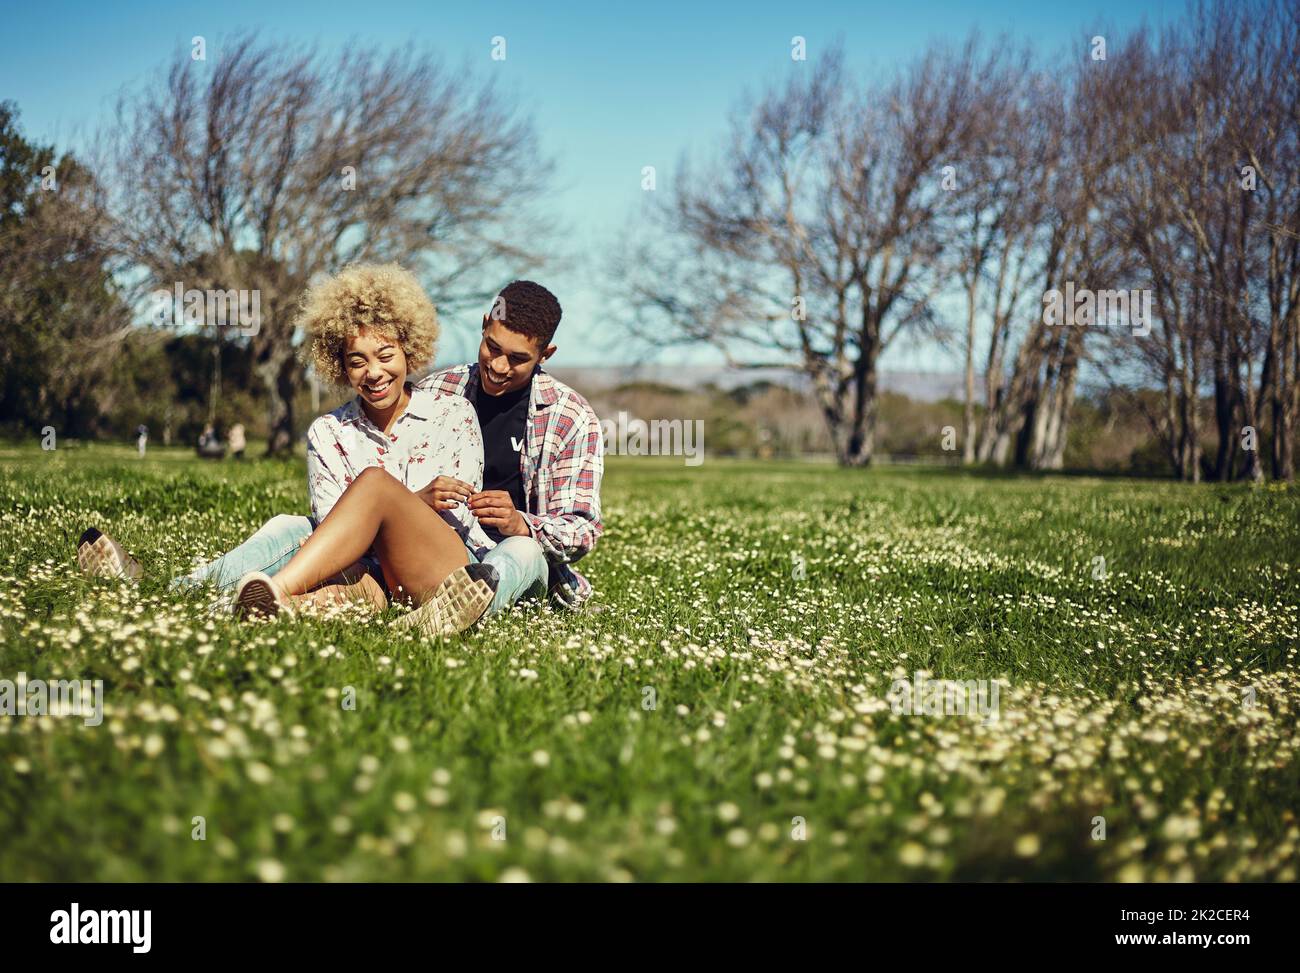 This is our favorite spot. Shot of a young couple spending quality time together at the park. Stock Photo